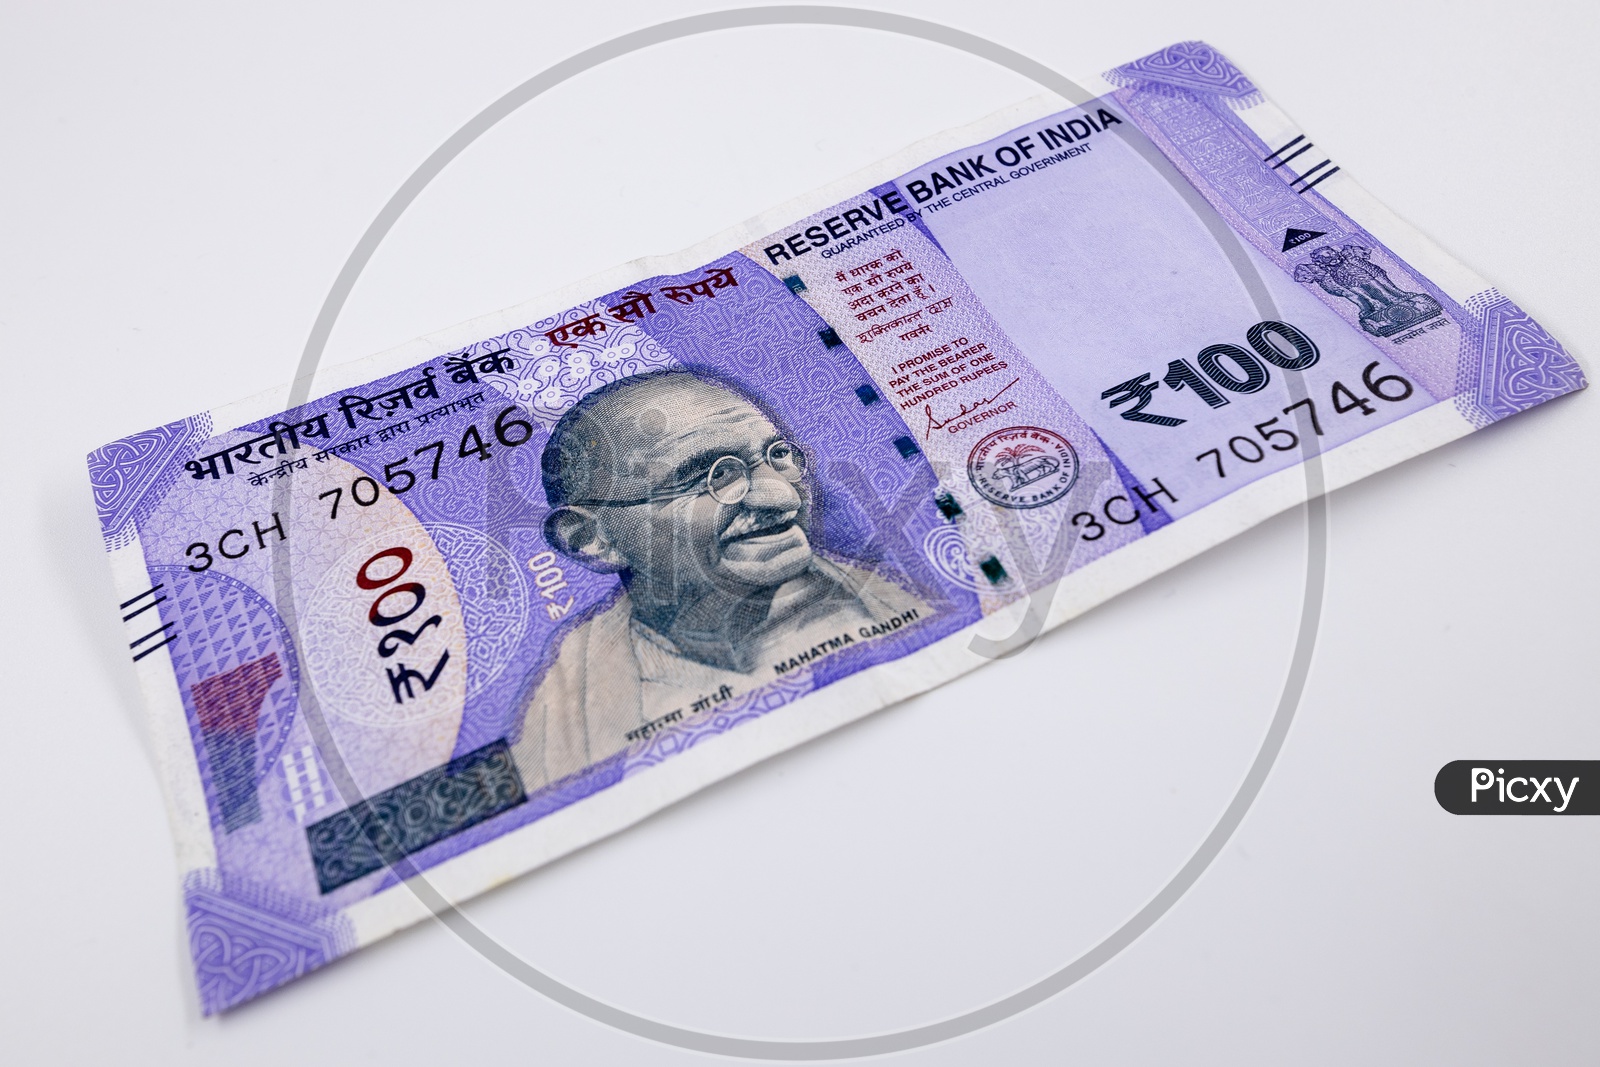 Indian New  Hundred Rupee Currency Note  On an Isolated White Background